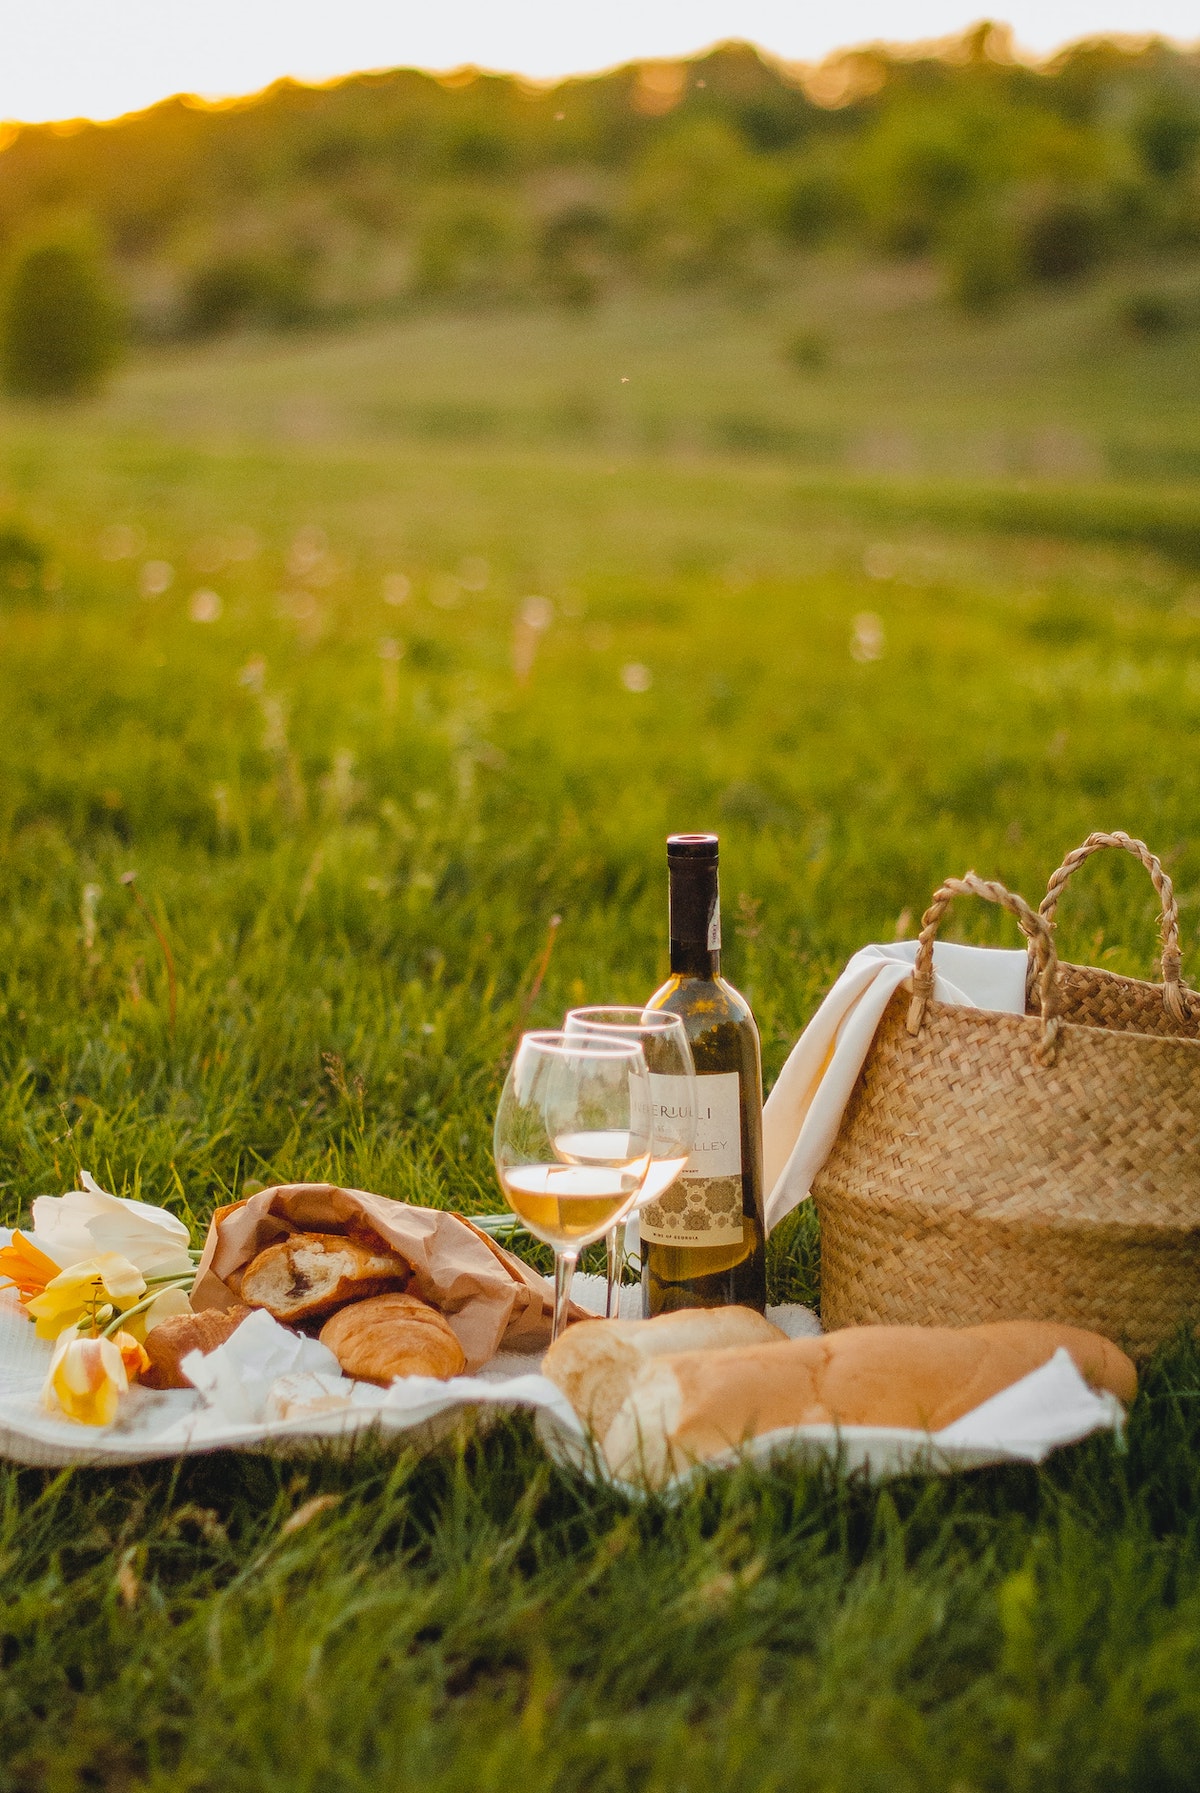 Picnic spread of bread, pastries, and wine next to a brown wicker tote in a grassy field.